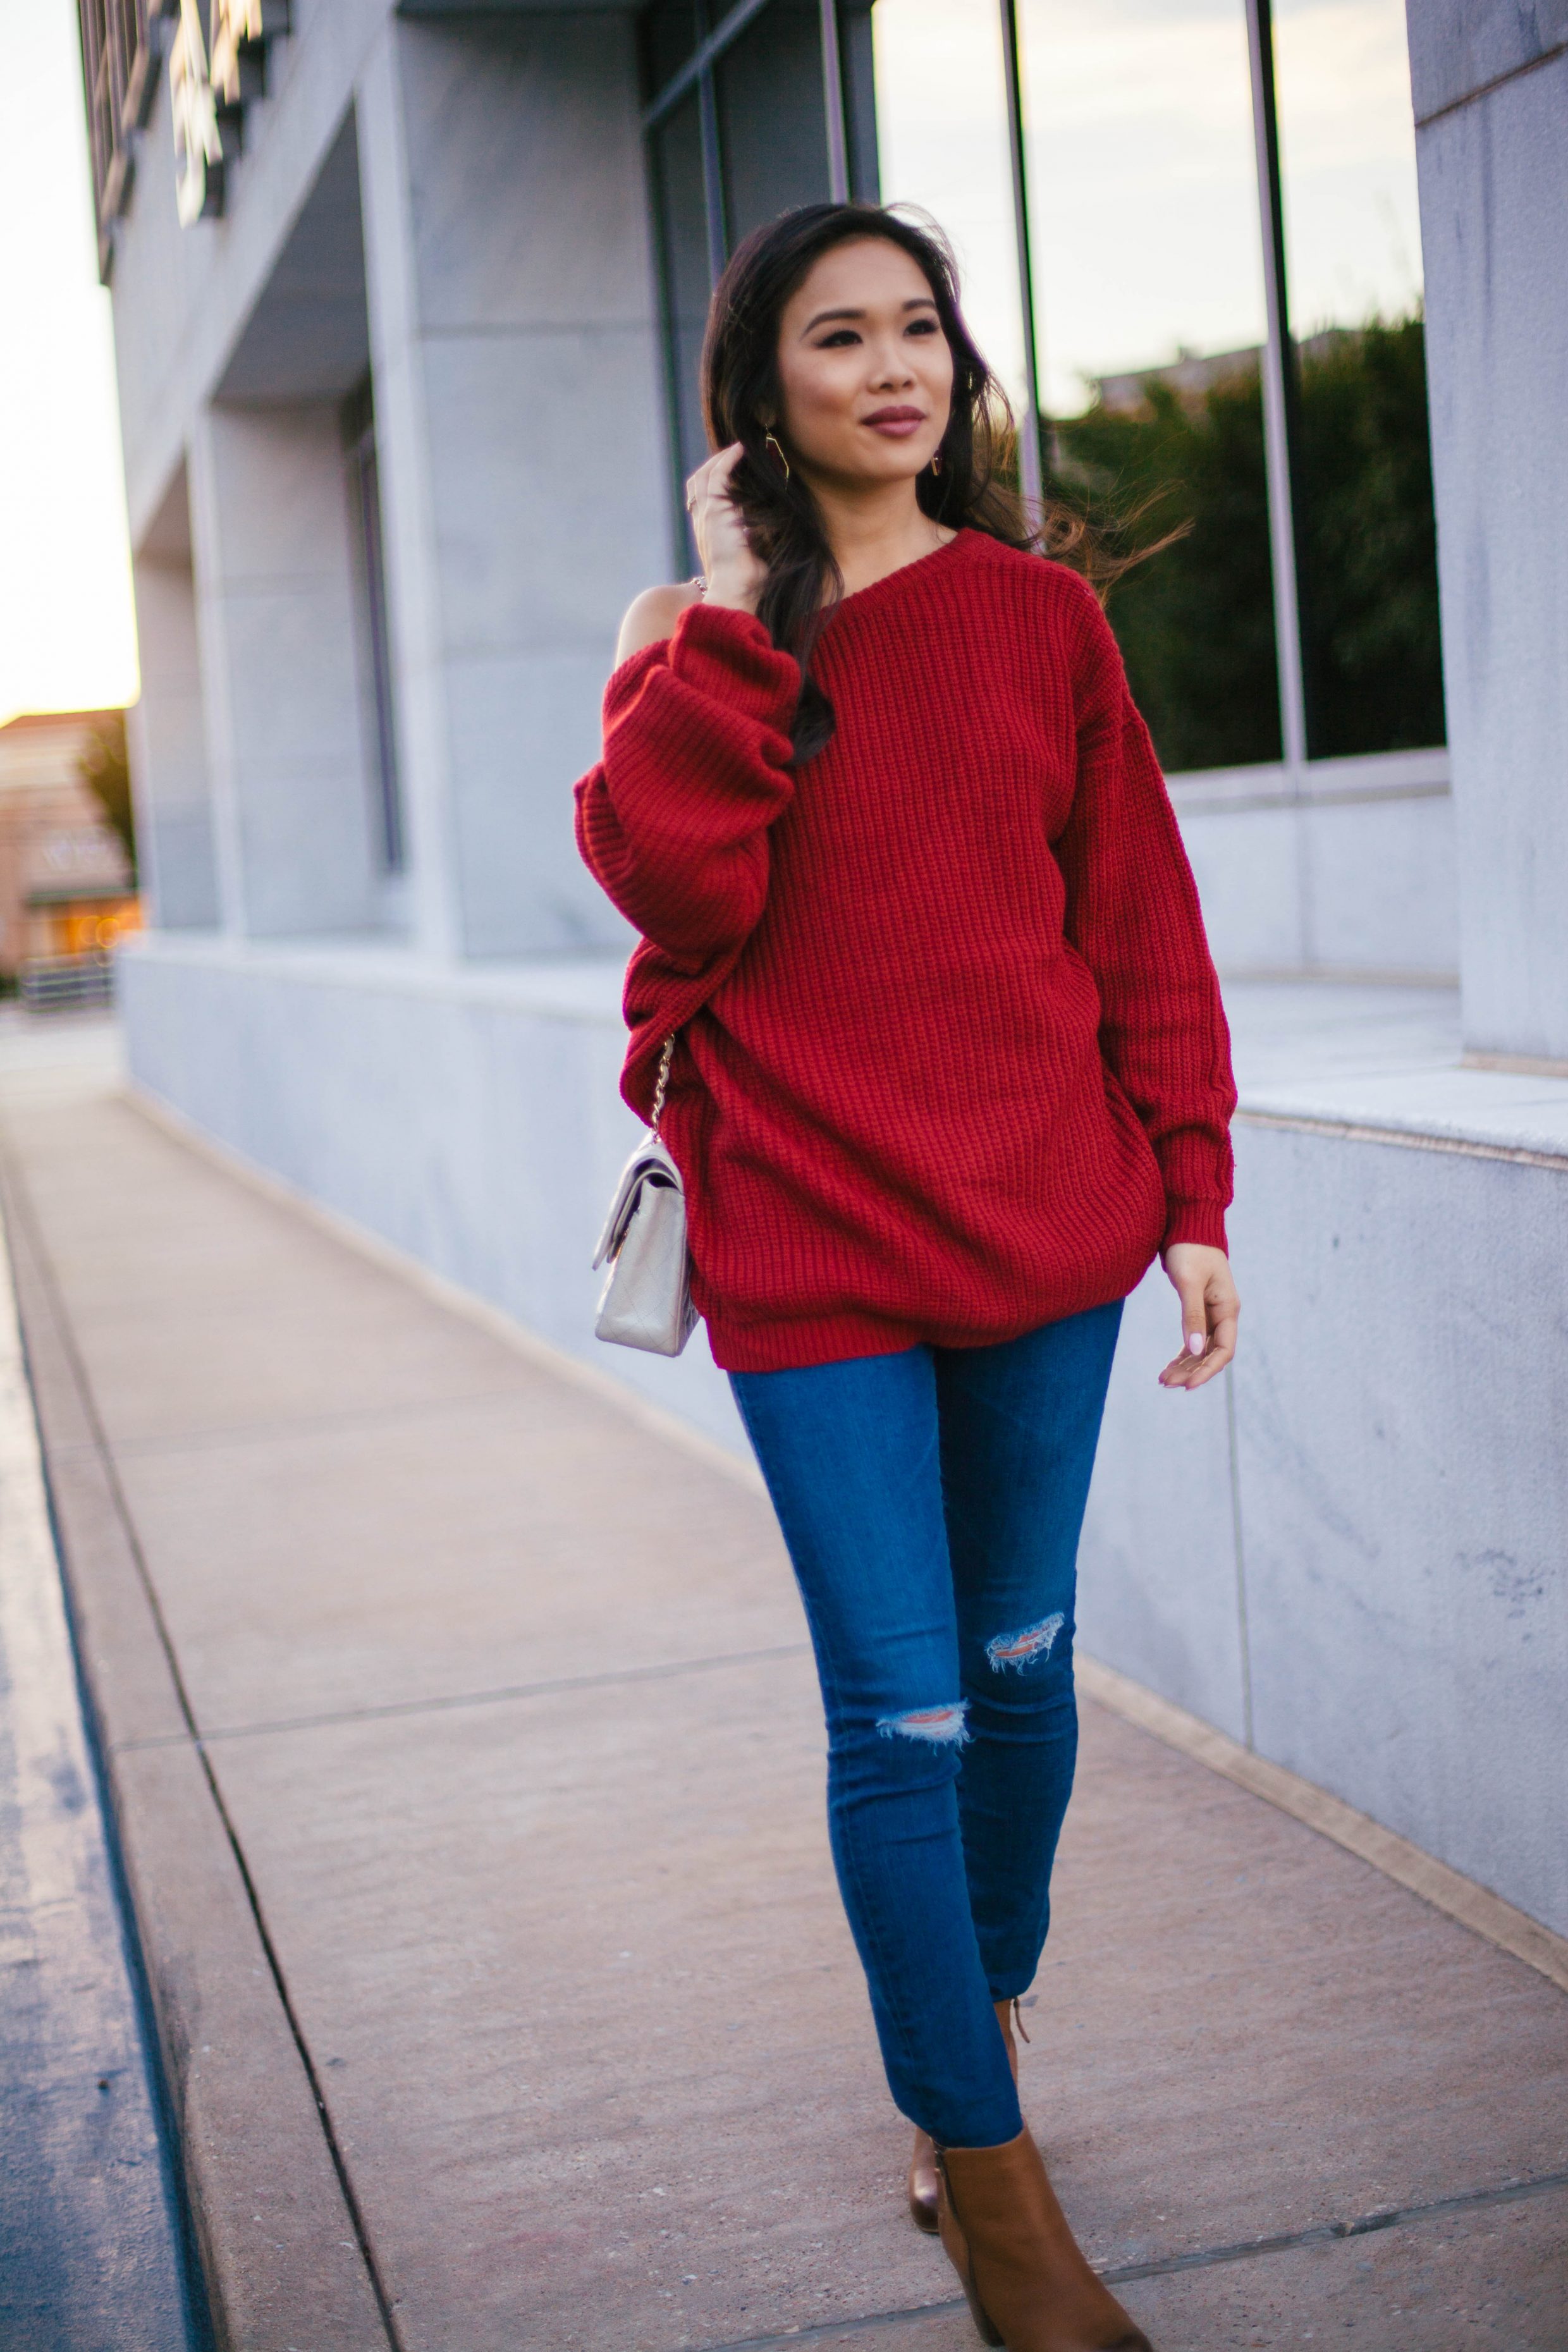 Fall Red :: Slouchy Sweater with Low Back - Color & Chic2480 x 3720